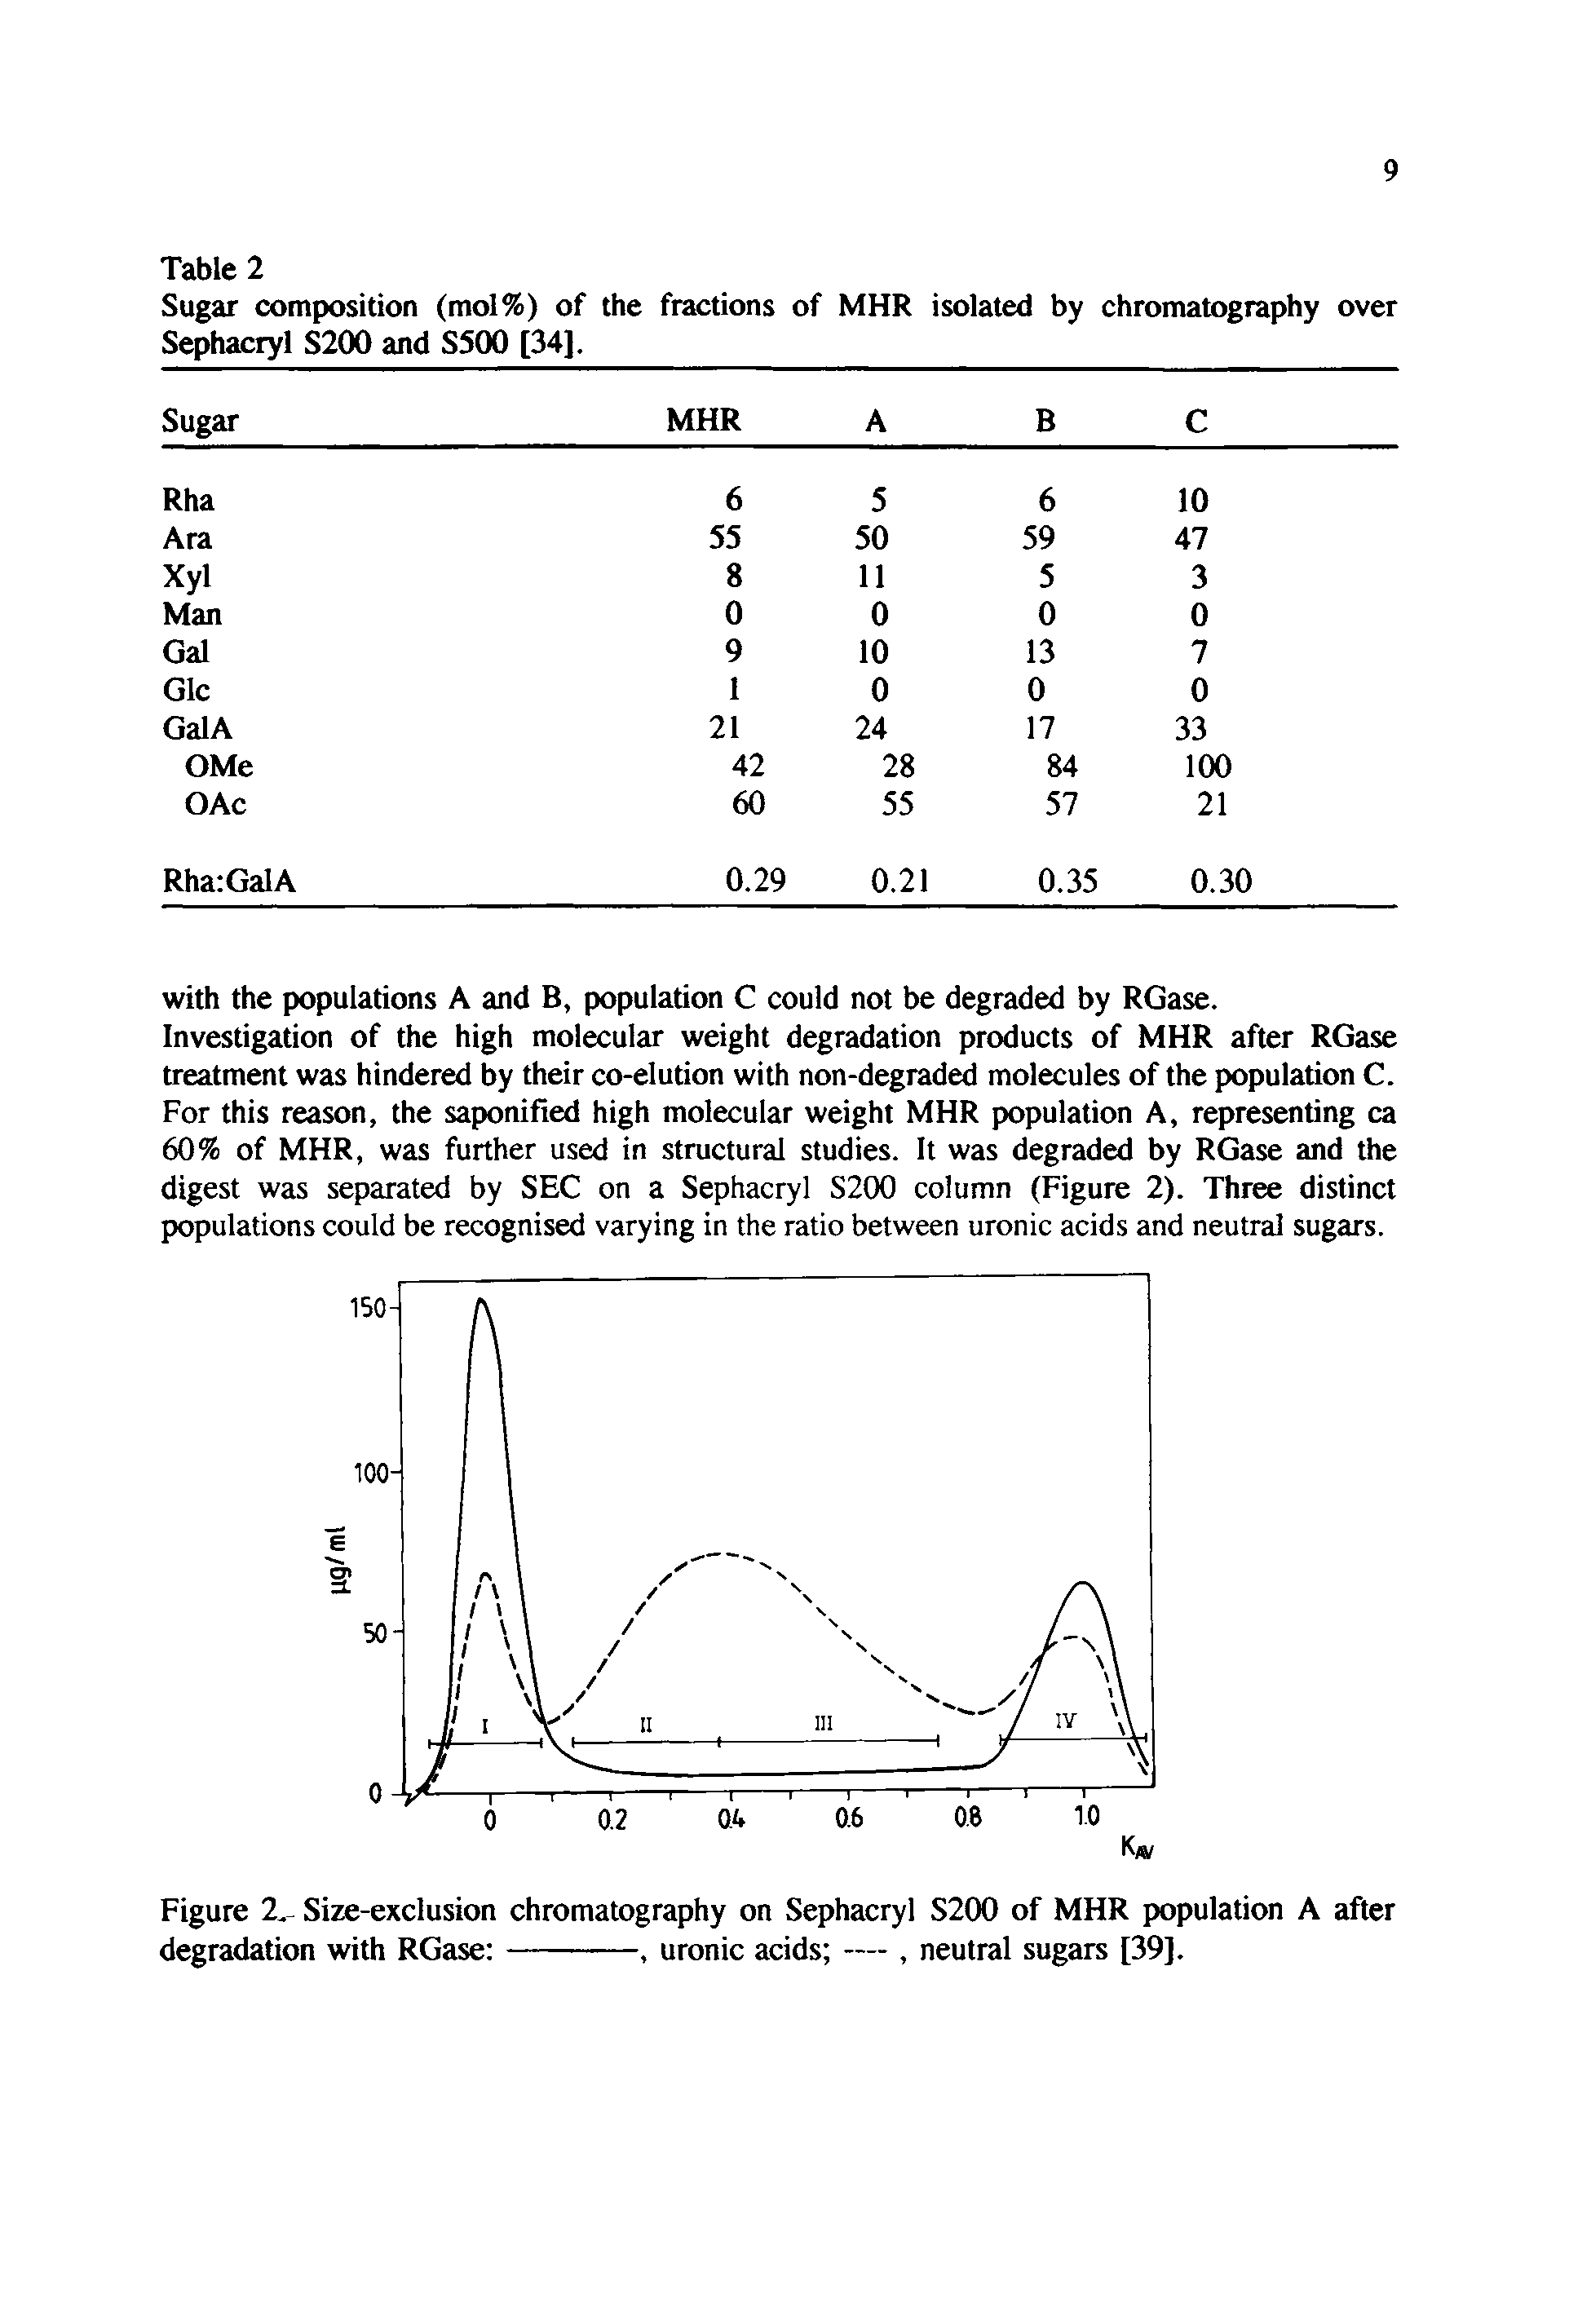 Figure 2 - Size-exclusion chromatography on Sephacryl S200 of MHR population A after degradation with RGase ------------, uronic acids —, neutral sugars [39].